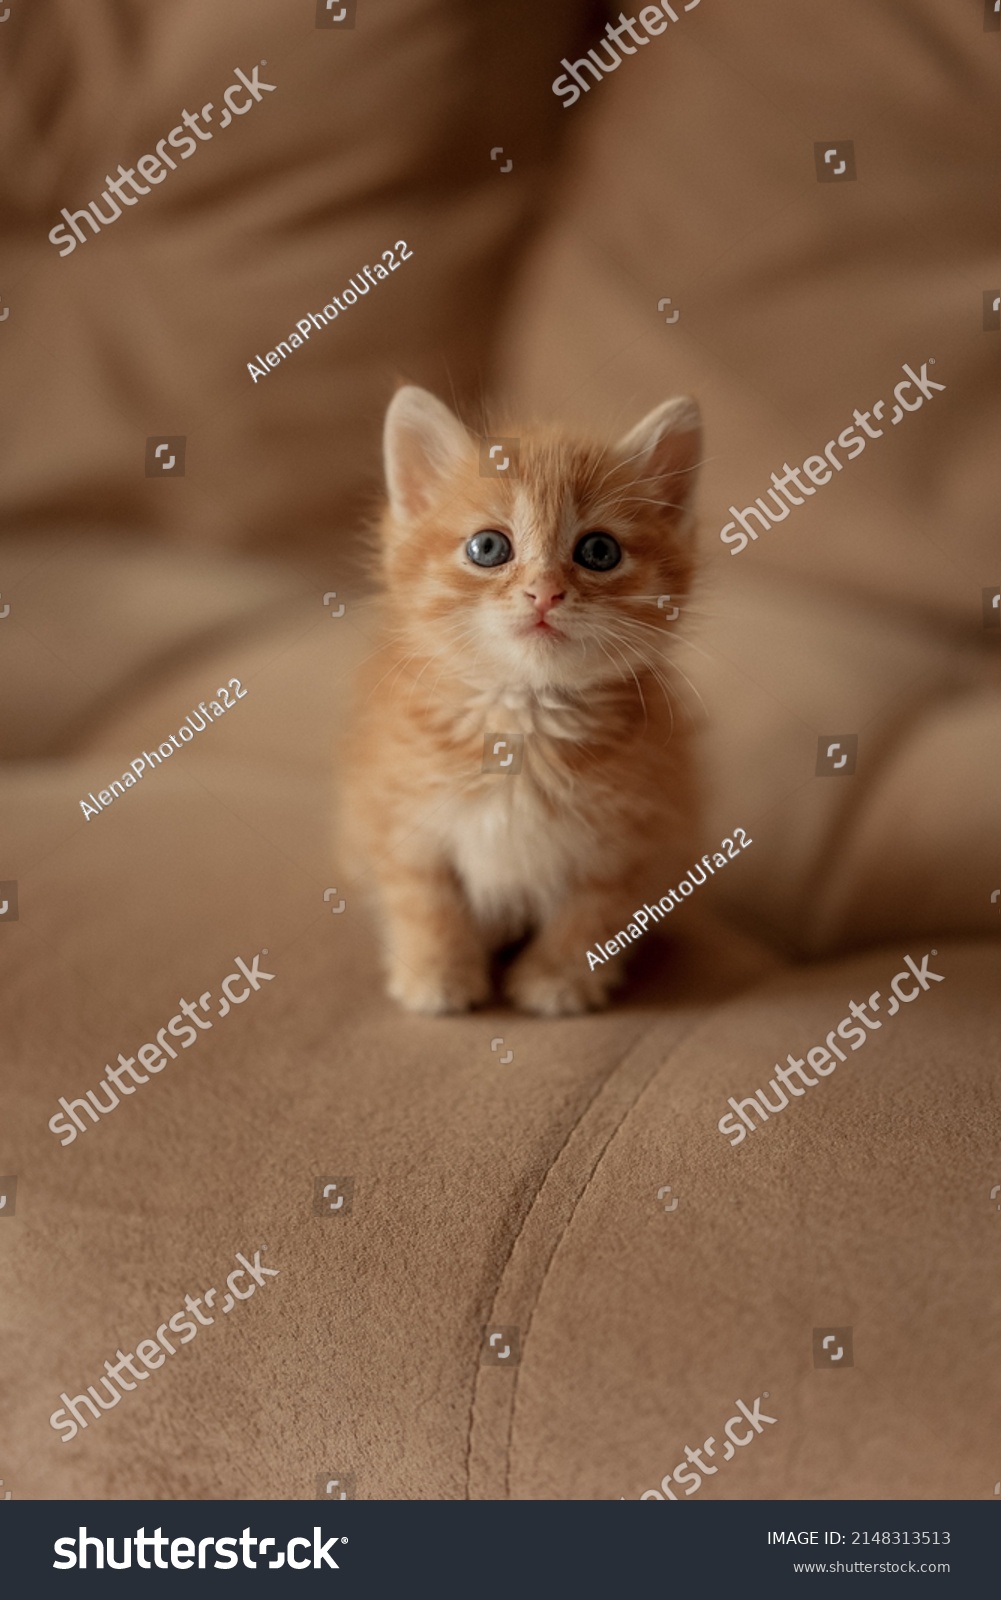 A little red kitten. Portrait of a cute red-haired red kitten with big eyes. The concept of happy adorable feline pets. #2148313513